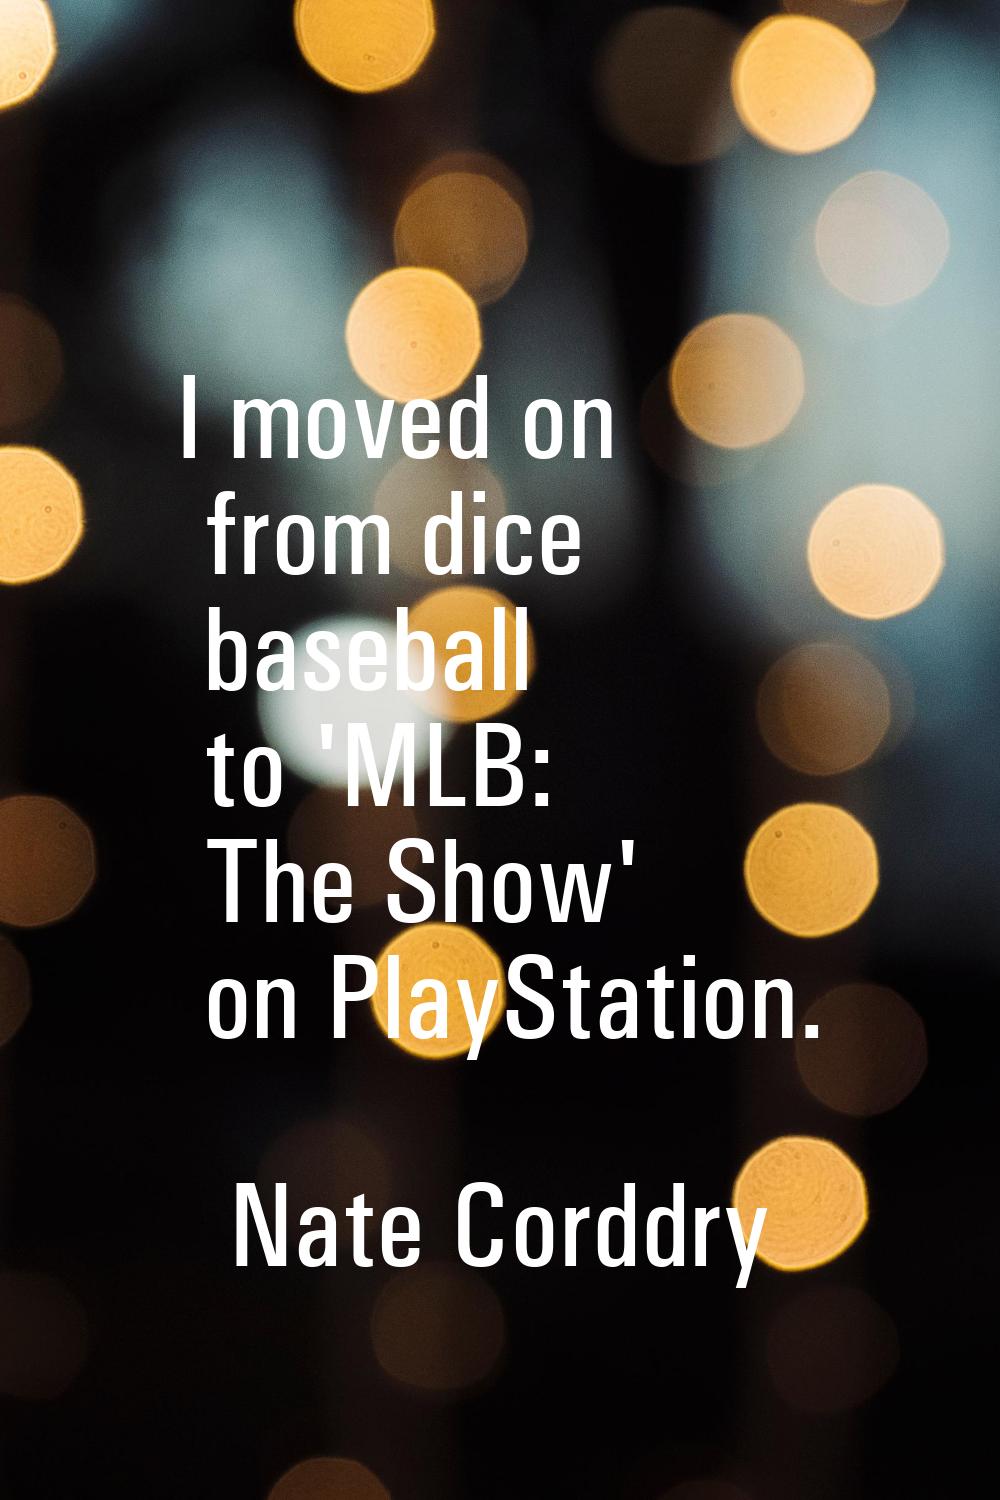 I moved on from dice baseball to 'MLB: The Show' on PlayStation.